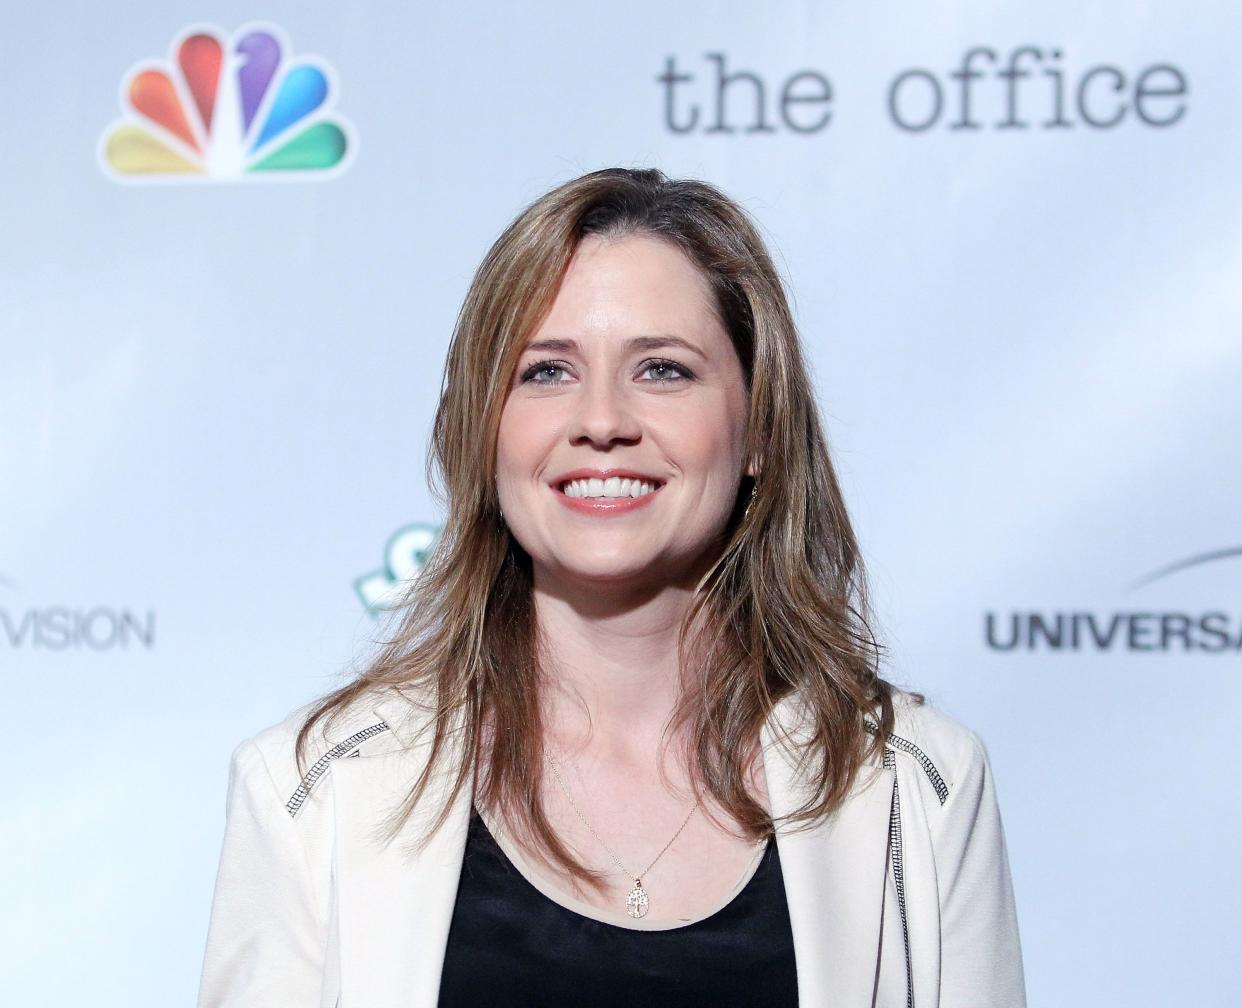 Jenna Fischer arrives at "The Office" series finale wrap party held at Unici Casa Gallery on March 16, 2013 in Culver City, California.